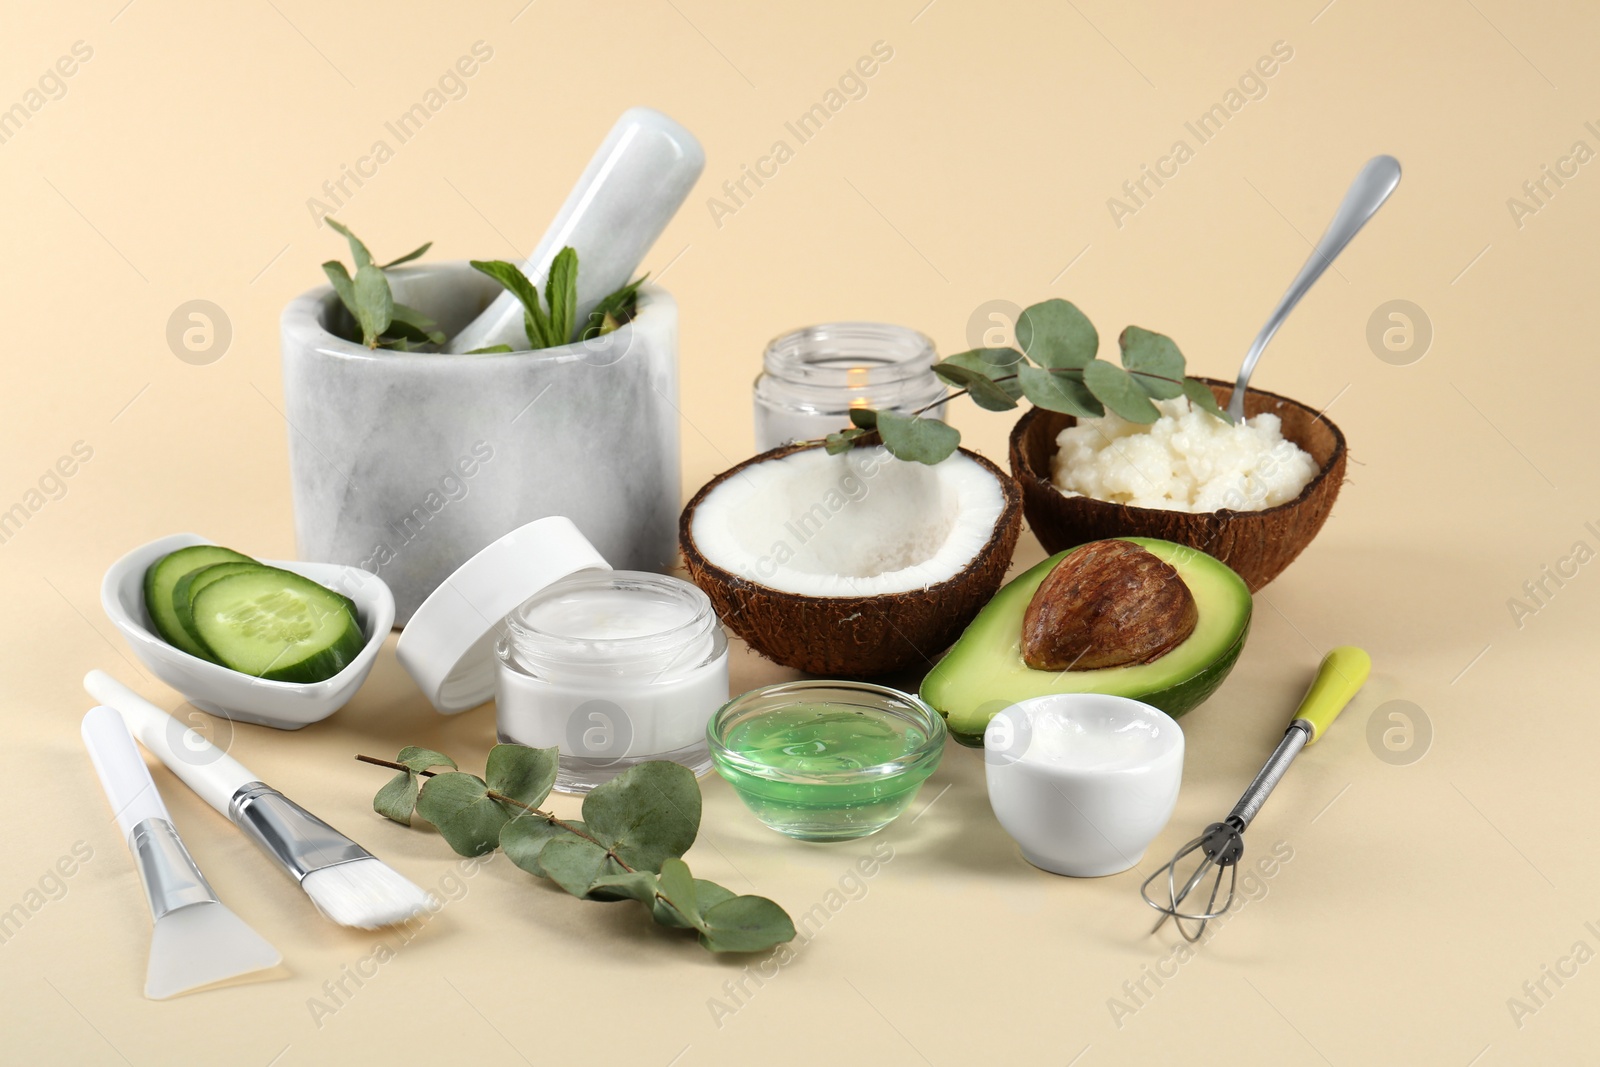 Photo of Homemade cosmetic products, tools and fresh ingredients on beige background. DIY beauty recipe